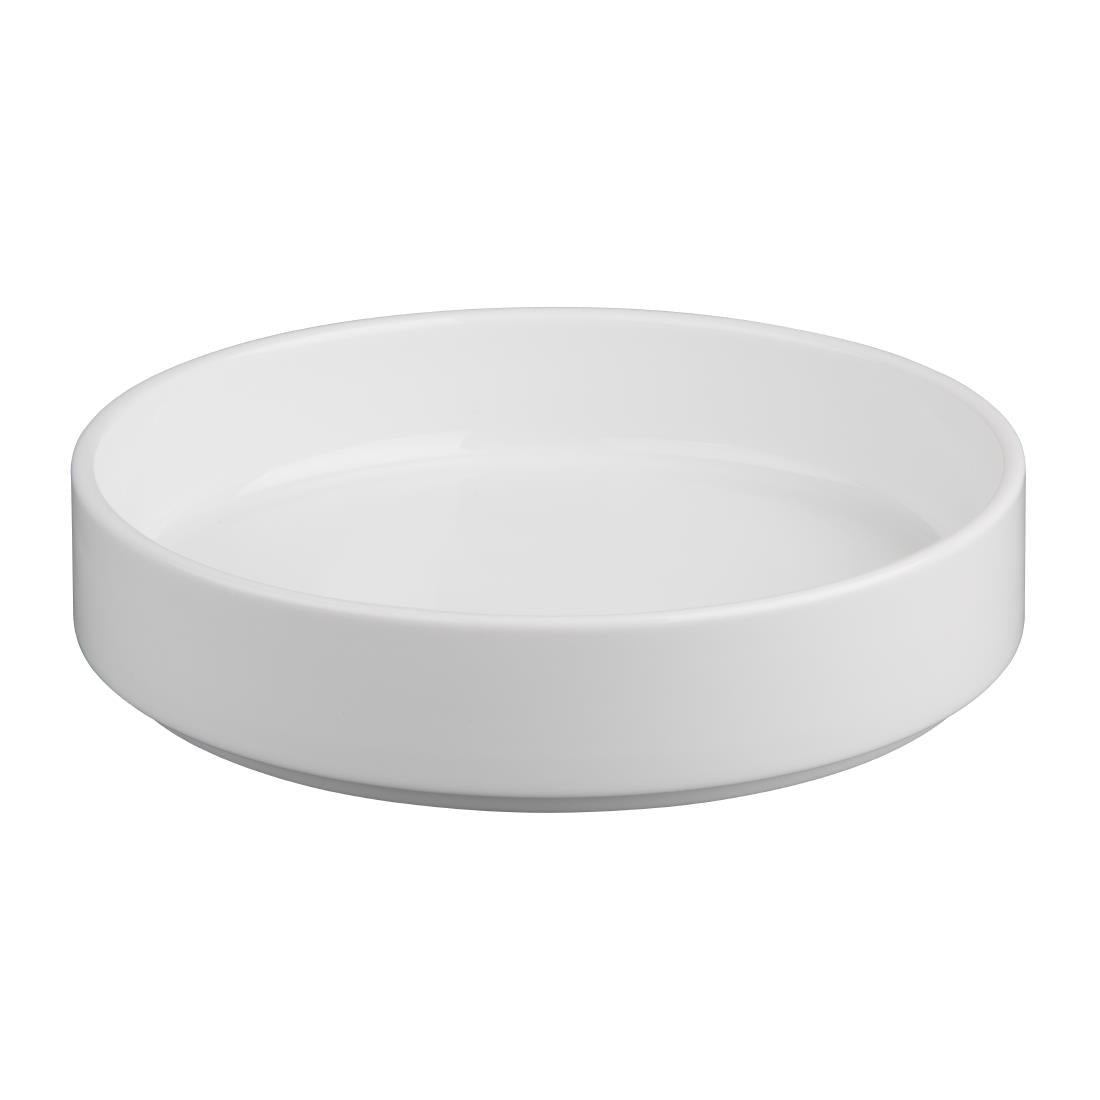 CK071 Olympia Whiteware Flat Walled Bowl - 215mm 8 1/2" (Box of 4)